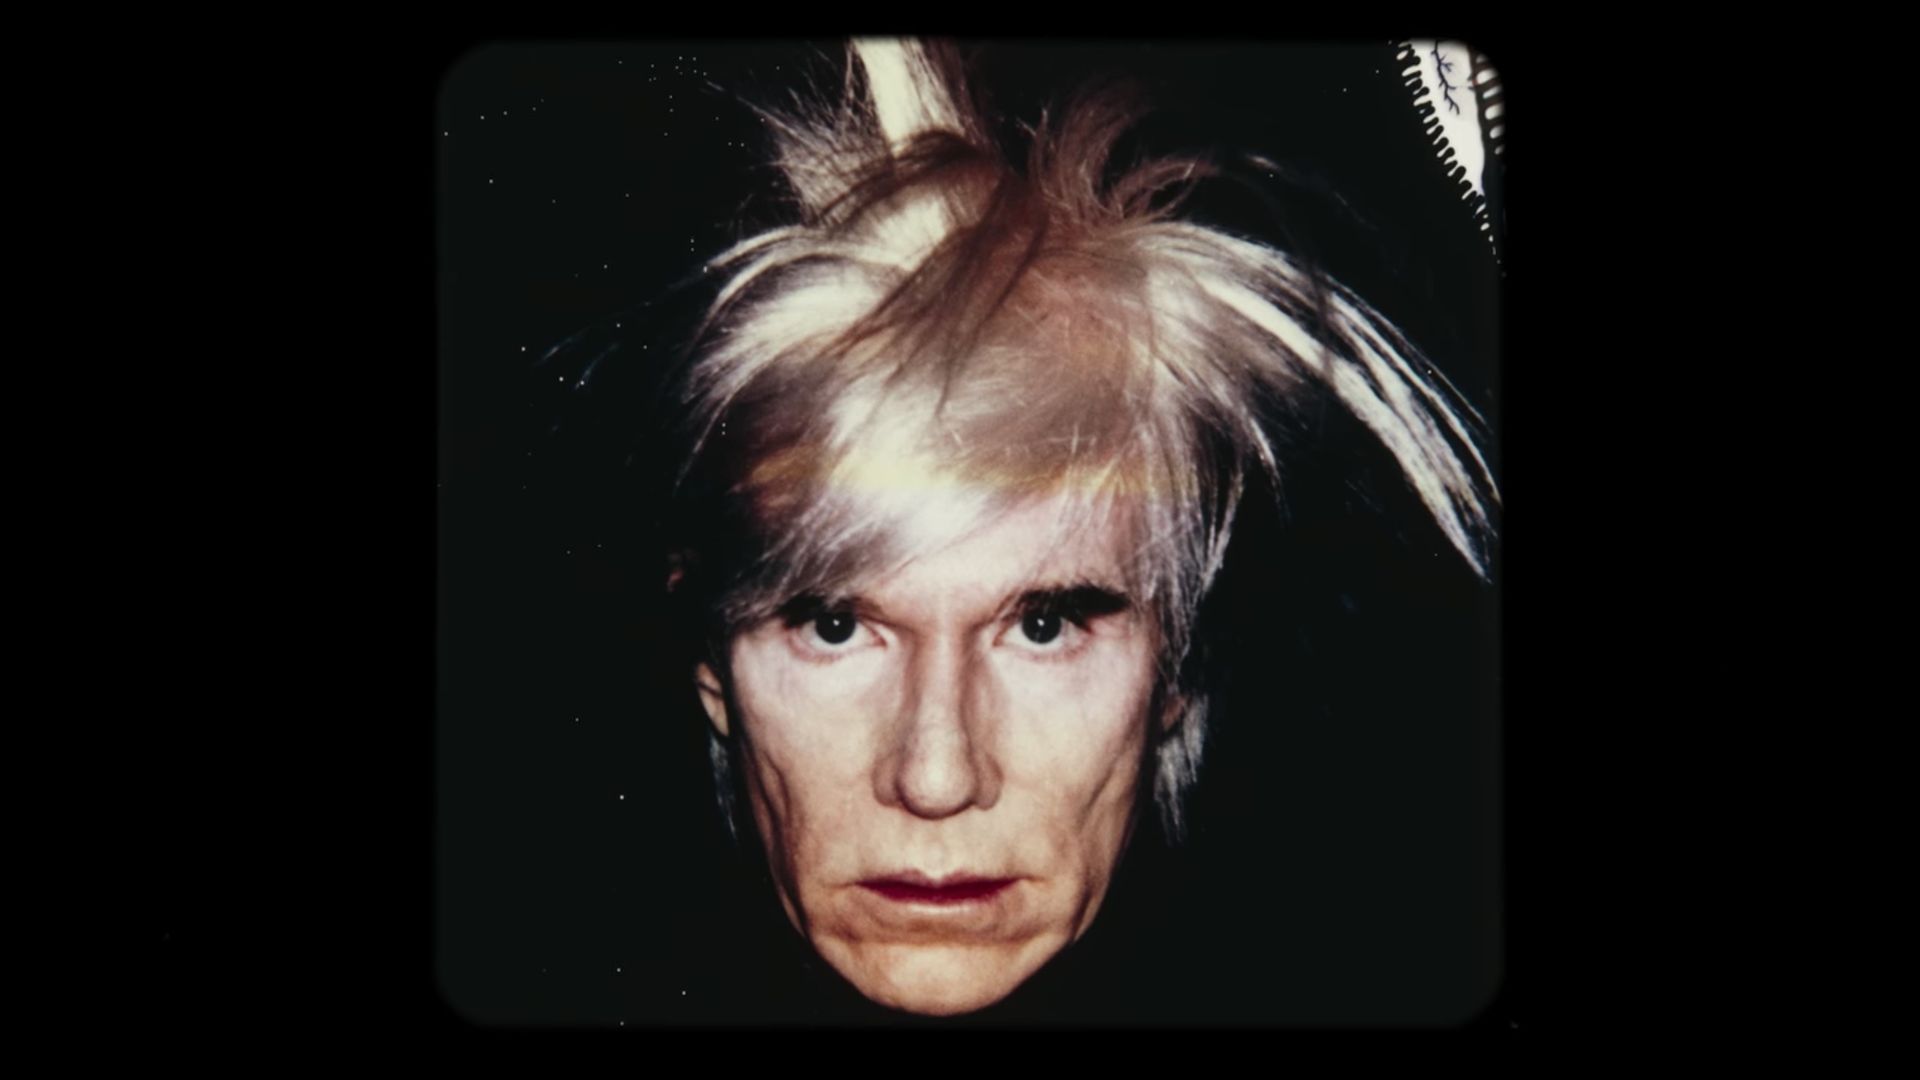 The Andy Warhol Diaries background